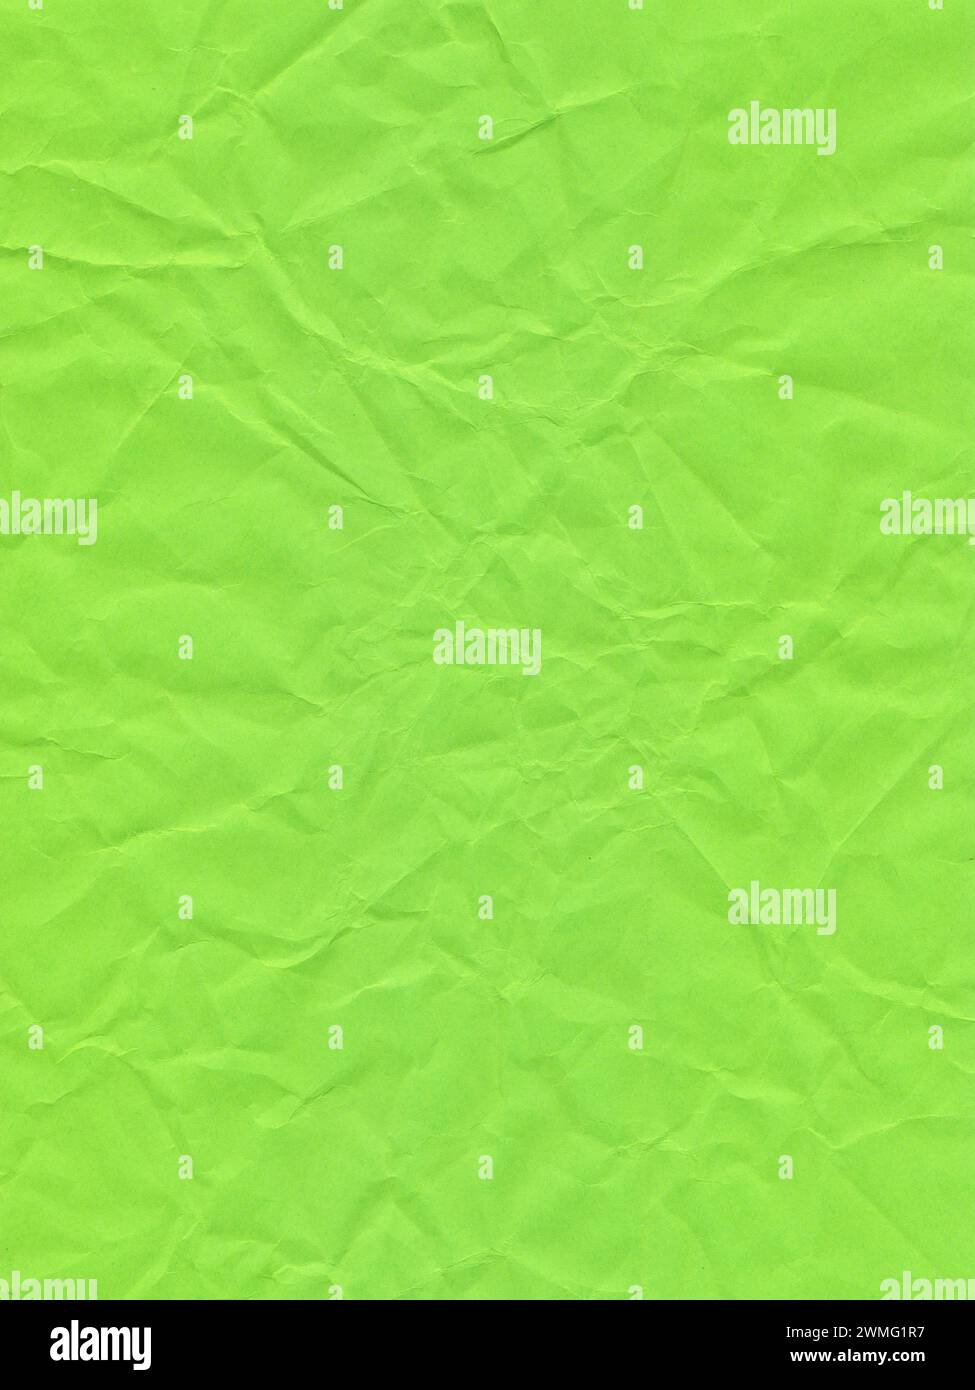 Texture of colored paper, surface of a crumpled light green sheet of paper Stock Photo